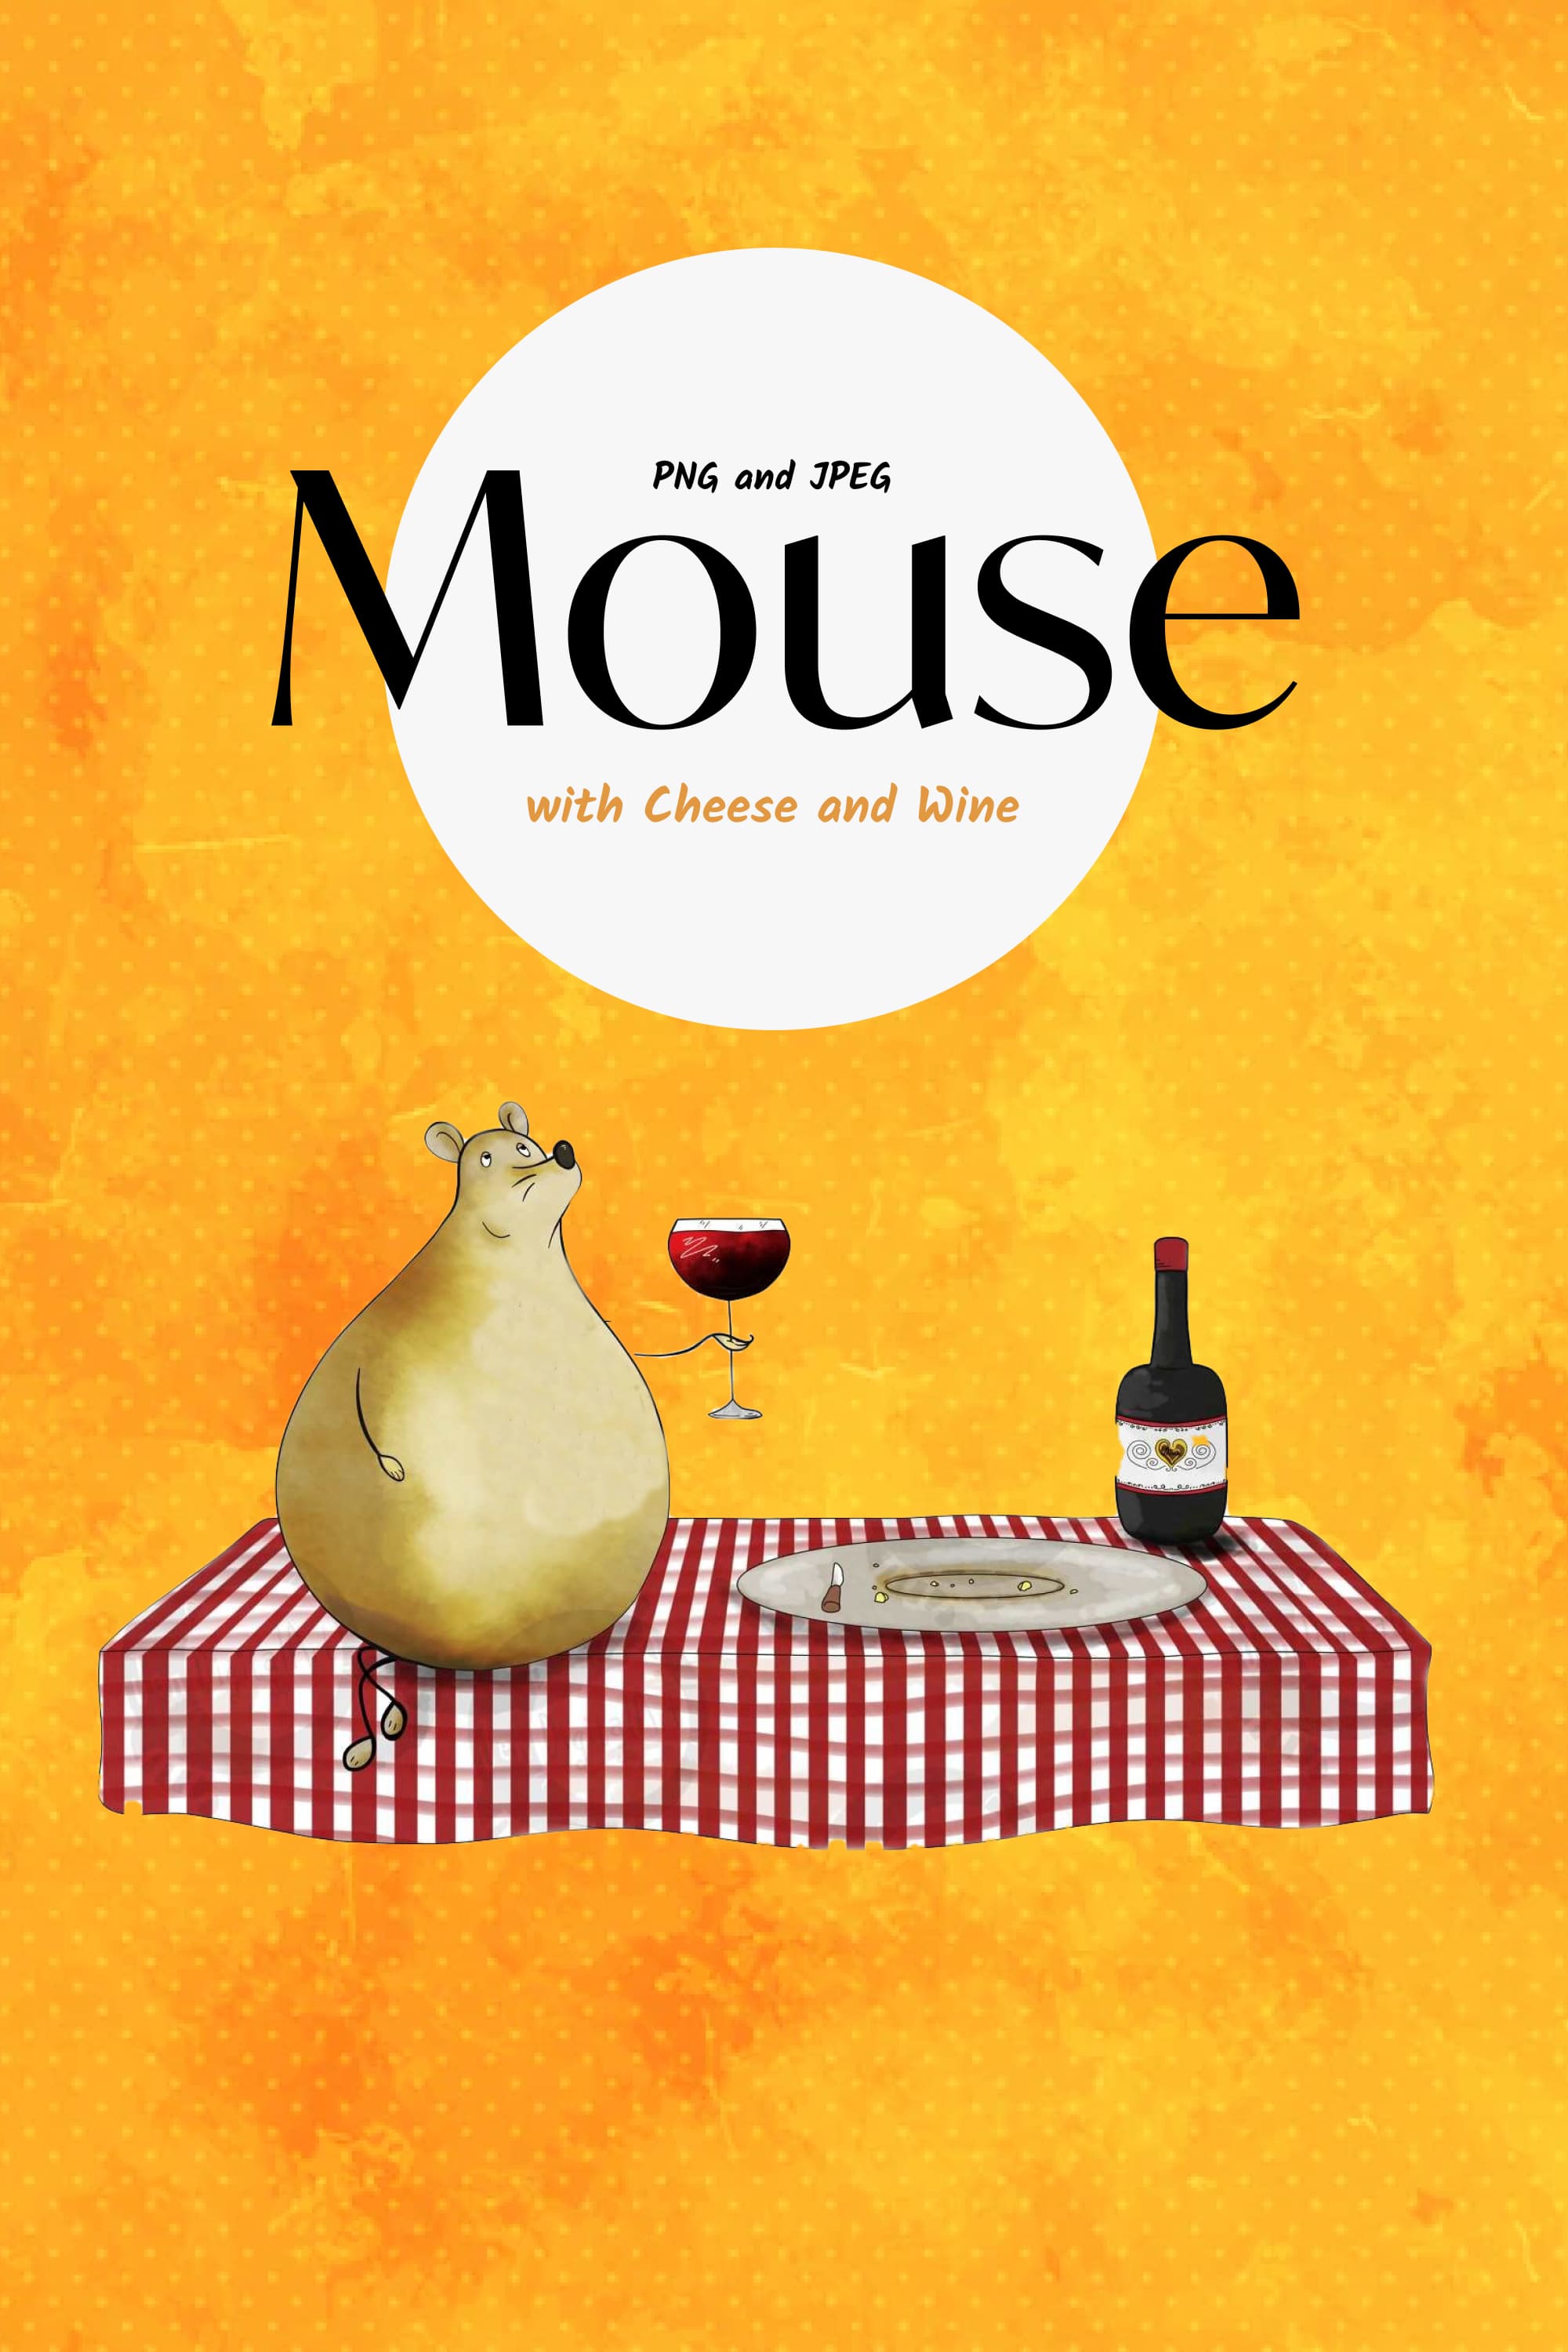 Colorful image of a plump mouse with a glass of wine on an orange background.